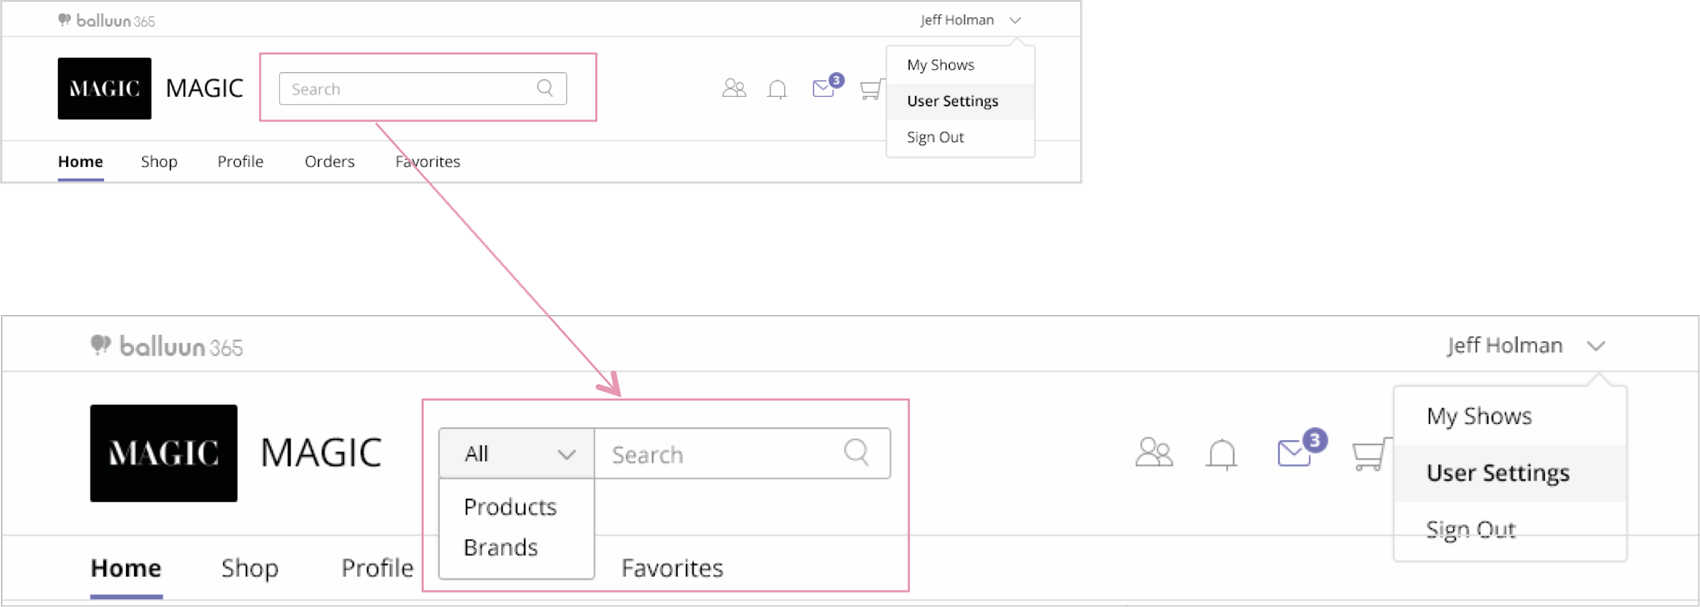 Usability Improvements - Search